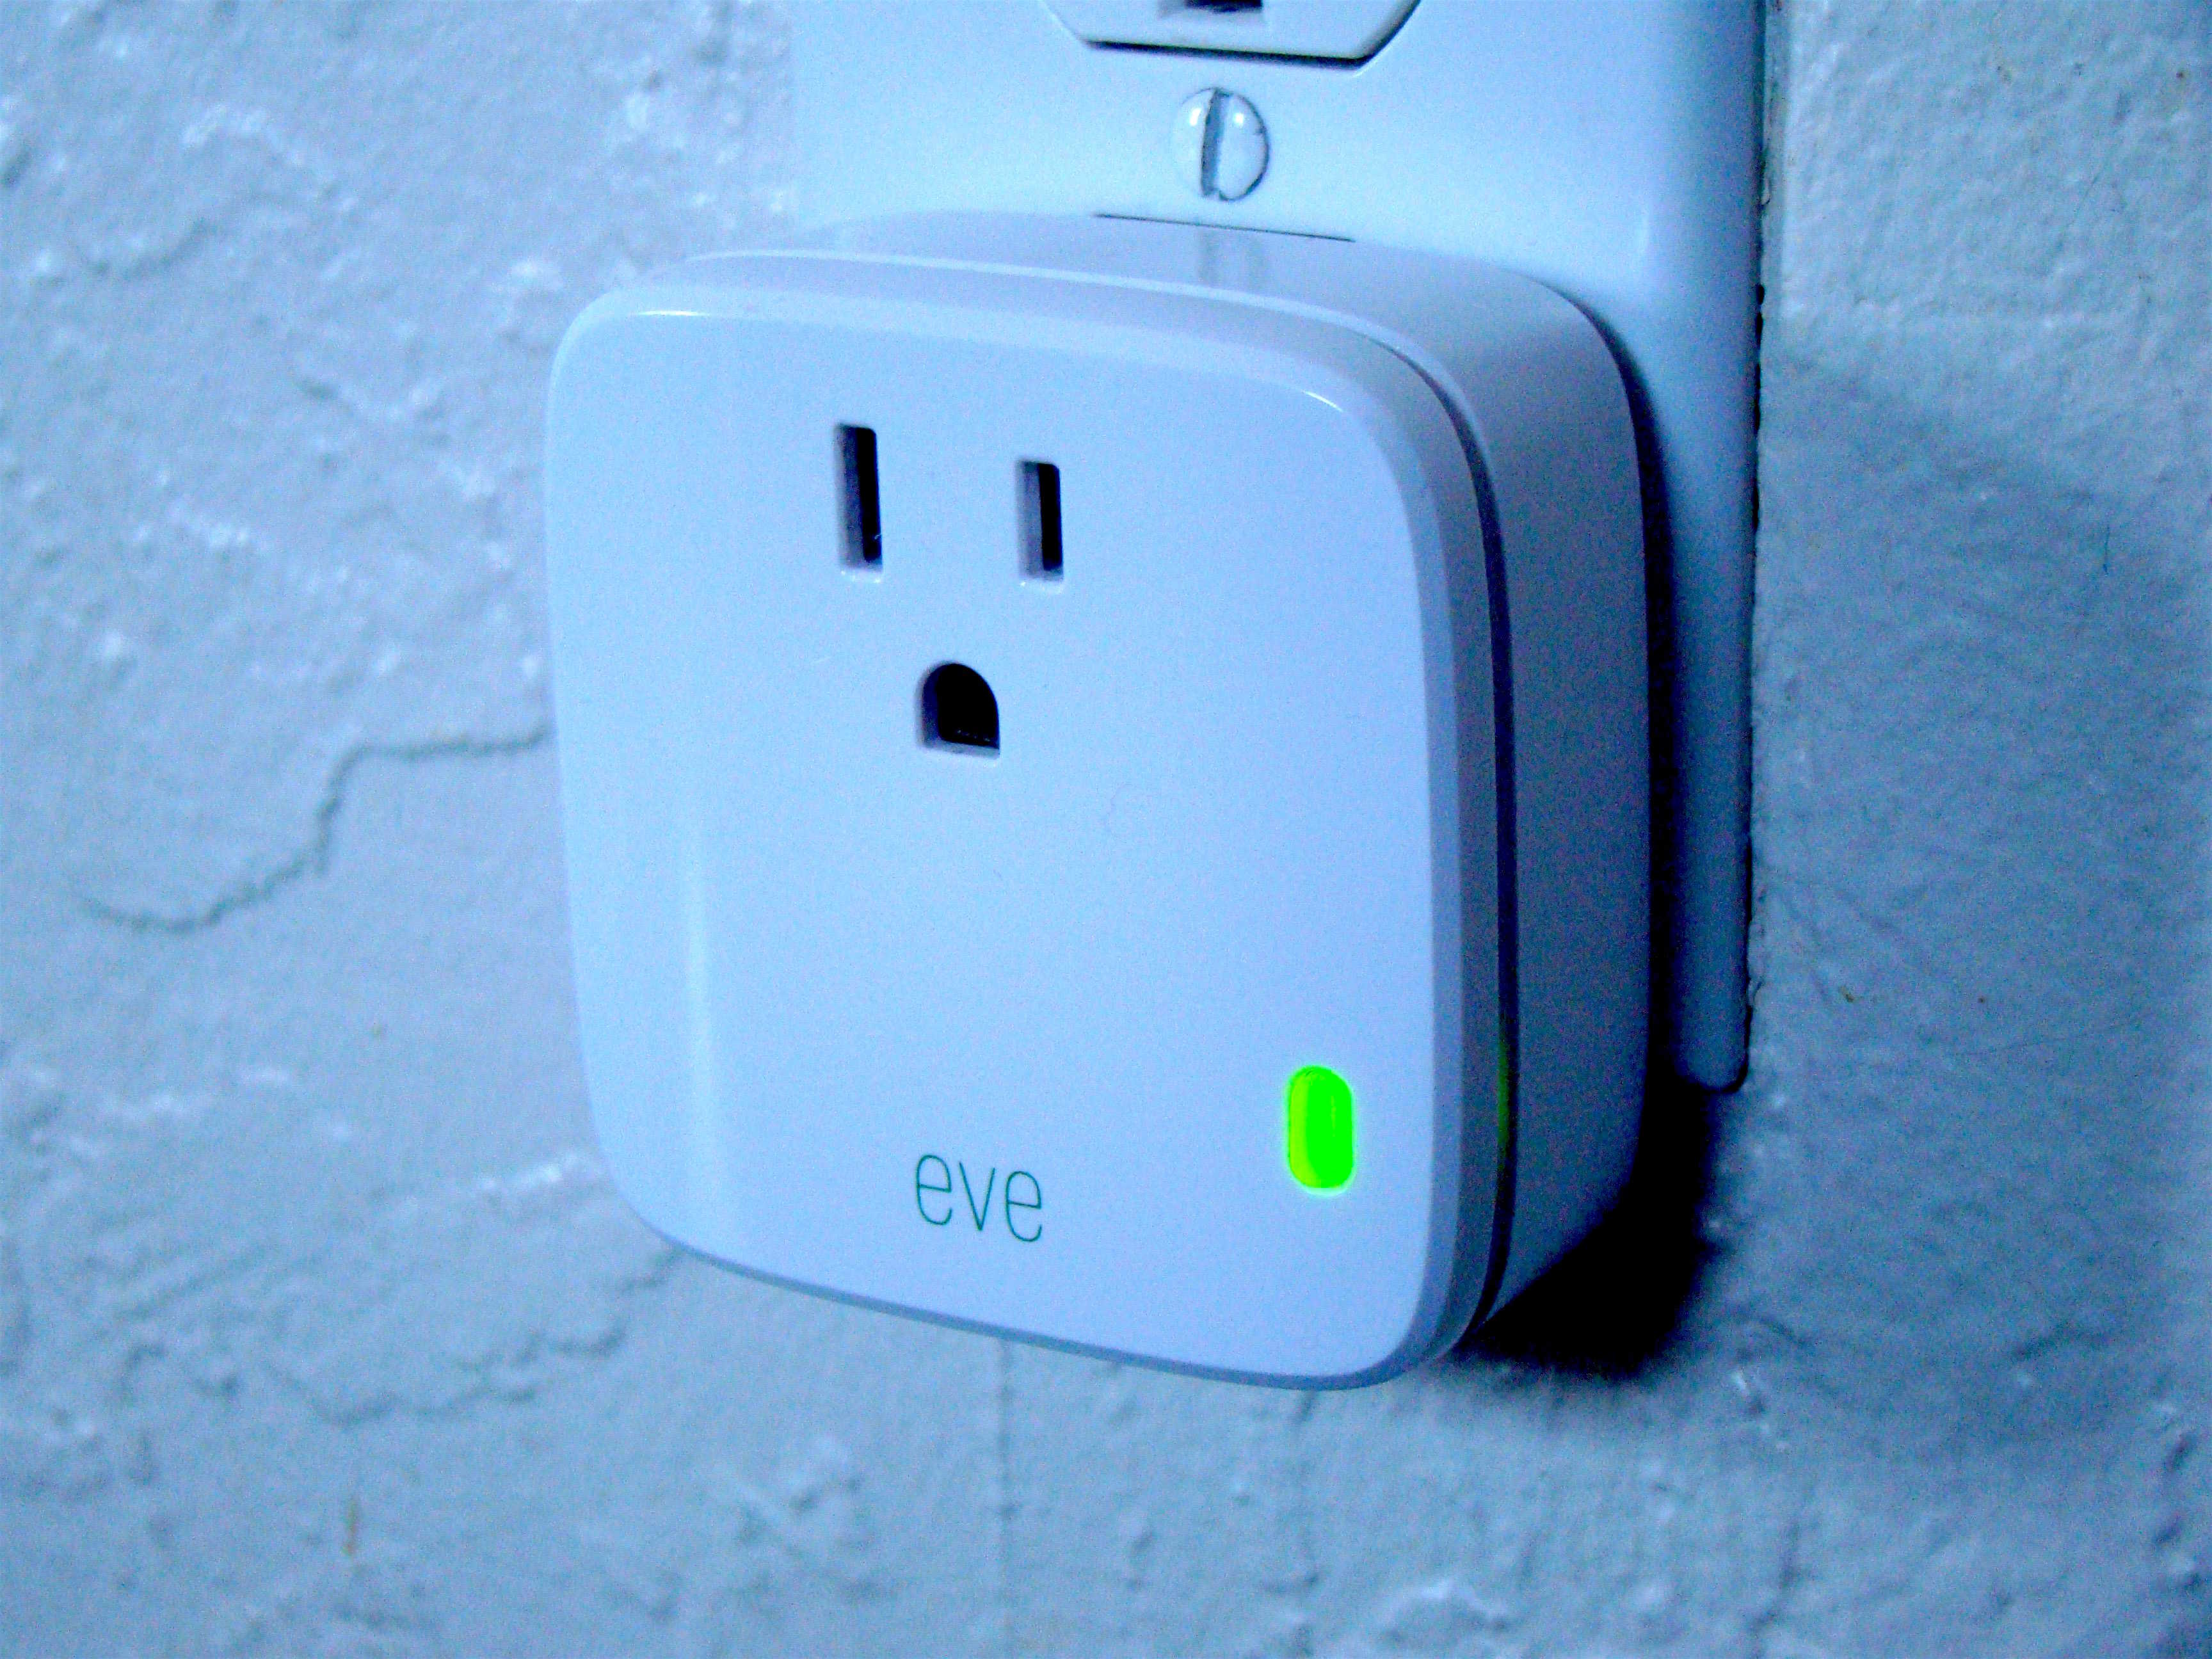 Elgato's Eve Energy Switch and Power Meter will track and control all your pluggable devices.